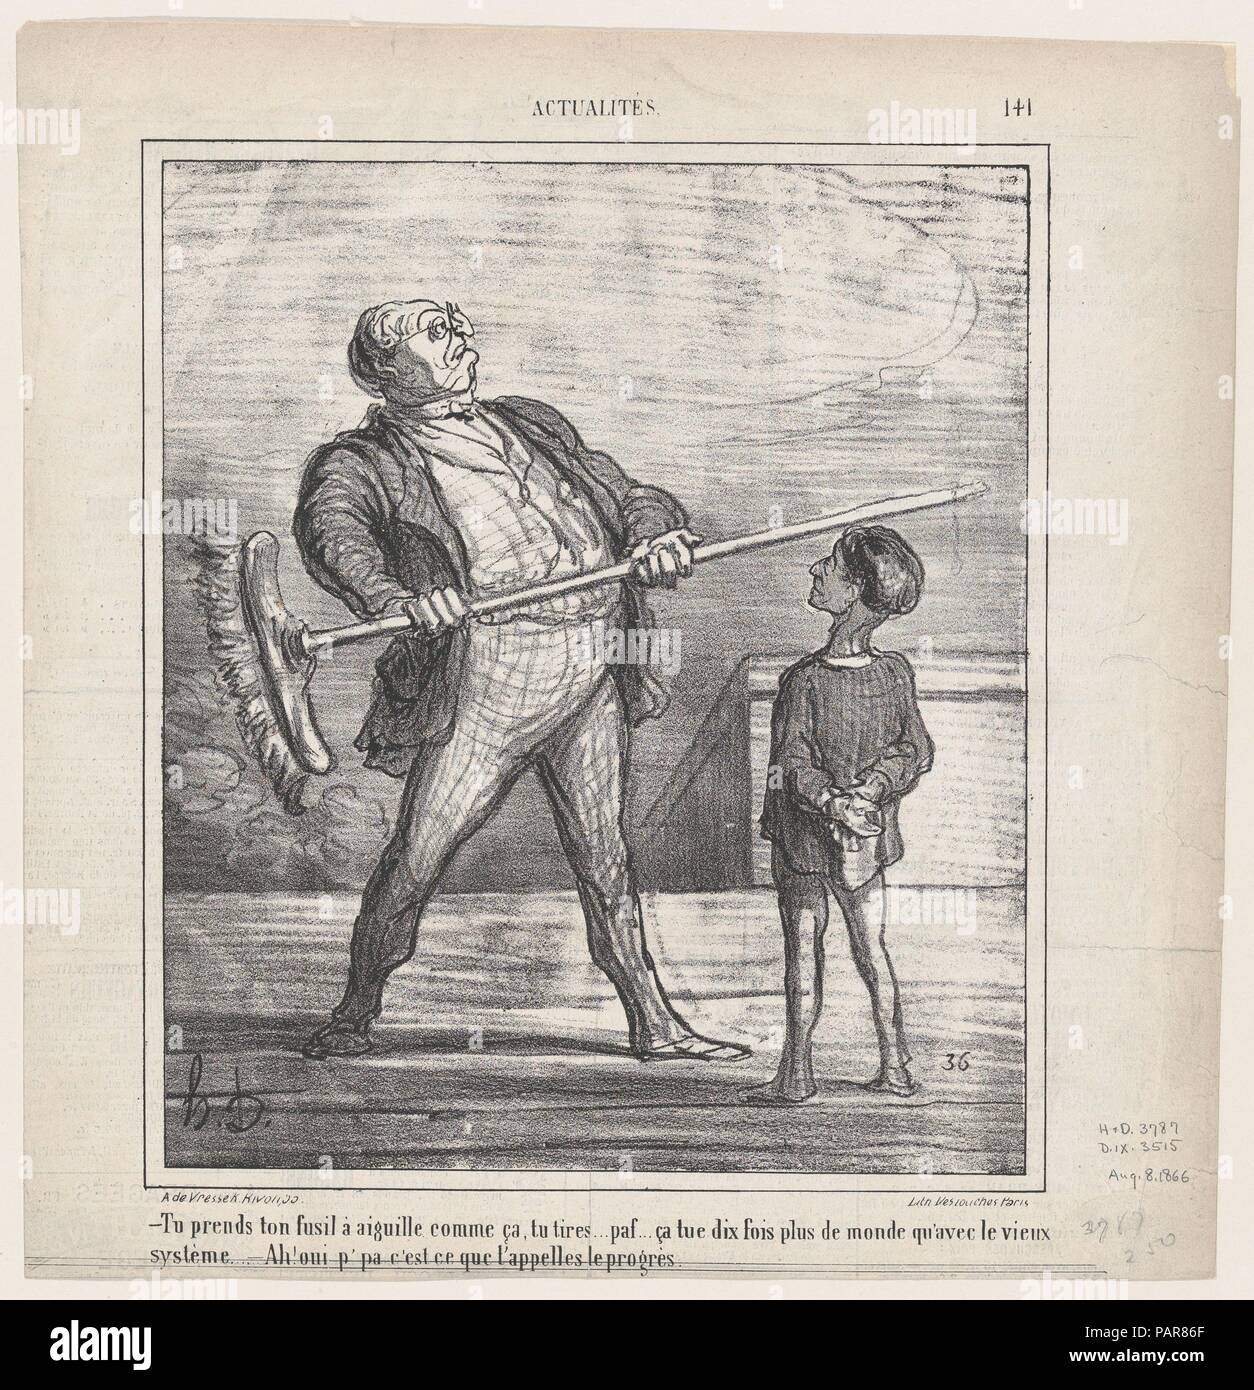 -You take your pin-gun in your hand like this.... you fire... puff... this kills ten times more people than the old system... -Ah, yes papa, this is what one calls progress, from 'News of the day,' published in Le Charivari, August 8, 1866. Artist: Honoré Daumier (French, Marseilles 1808-1879 Valmondois). Dimensions: Image: 9 5/16 in. × 8 in. (23.7 × 20.3 cm)  Sheet: 11 7/16 × 11 1/8 in. (29.1 × 28.2 cm). Printer: Destouches (Paris). Publisher: Arnaud de Vresse. Series/Portfolio: 'News of the day' (Actualités). Date: August 8, 1866. Museum: Metropolitan Museum of Art, New York, USA. Stock Photo